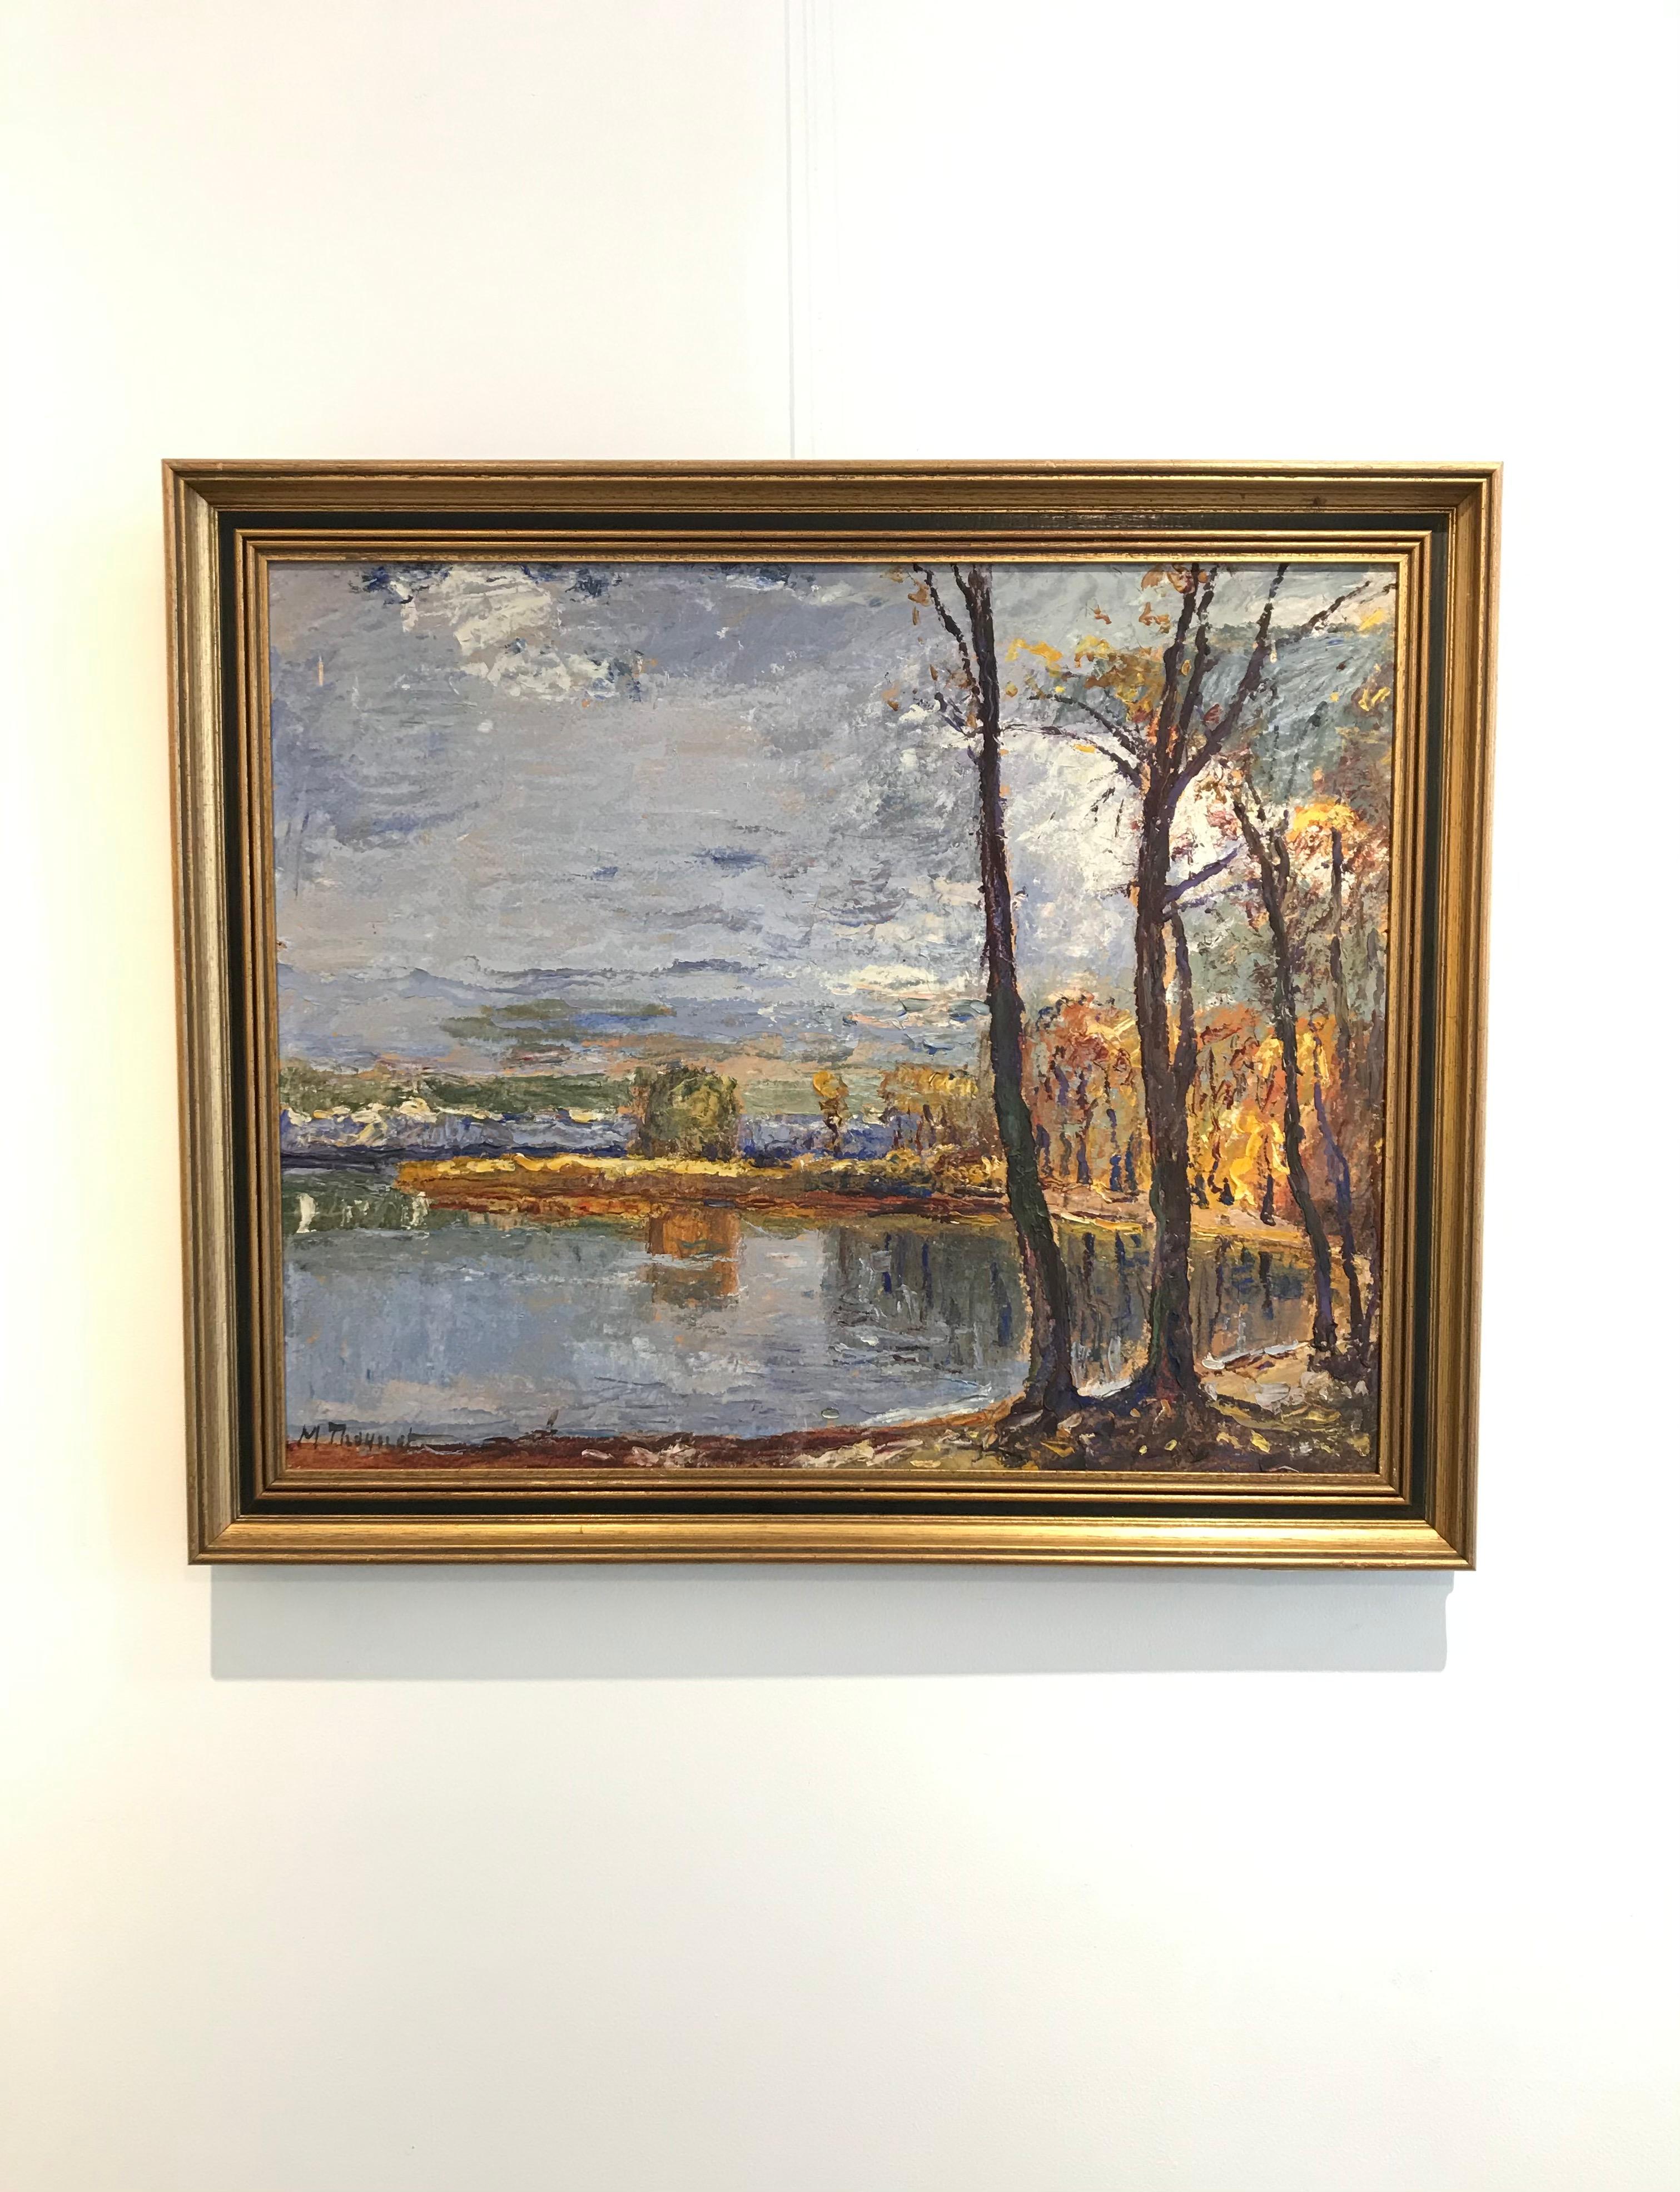 View of an autumn landscape - Painting by Max Theynet